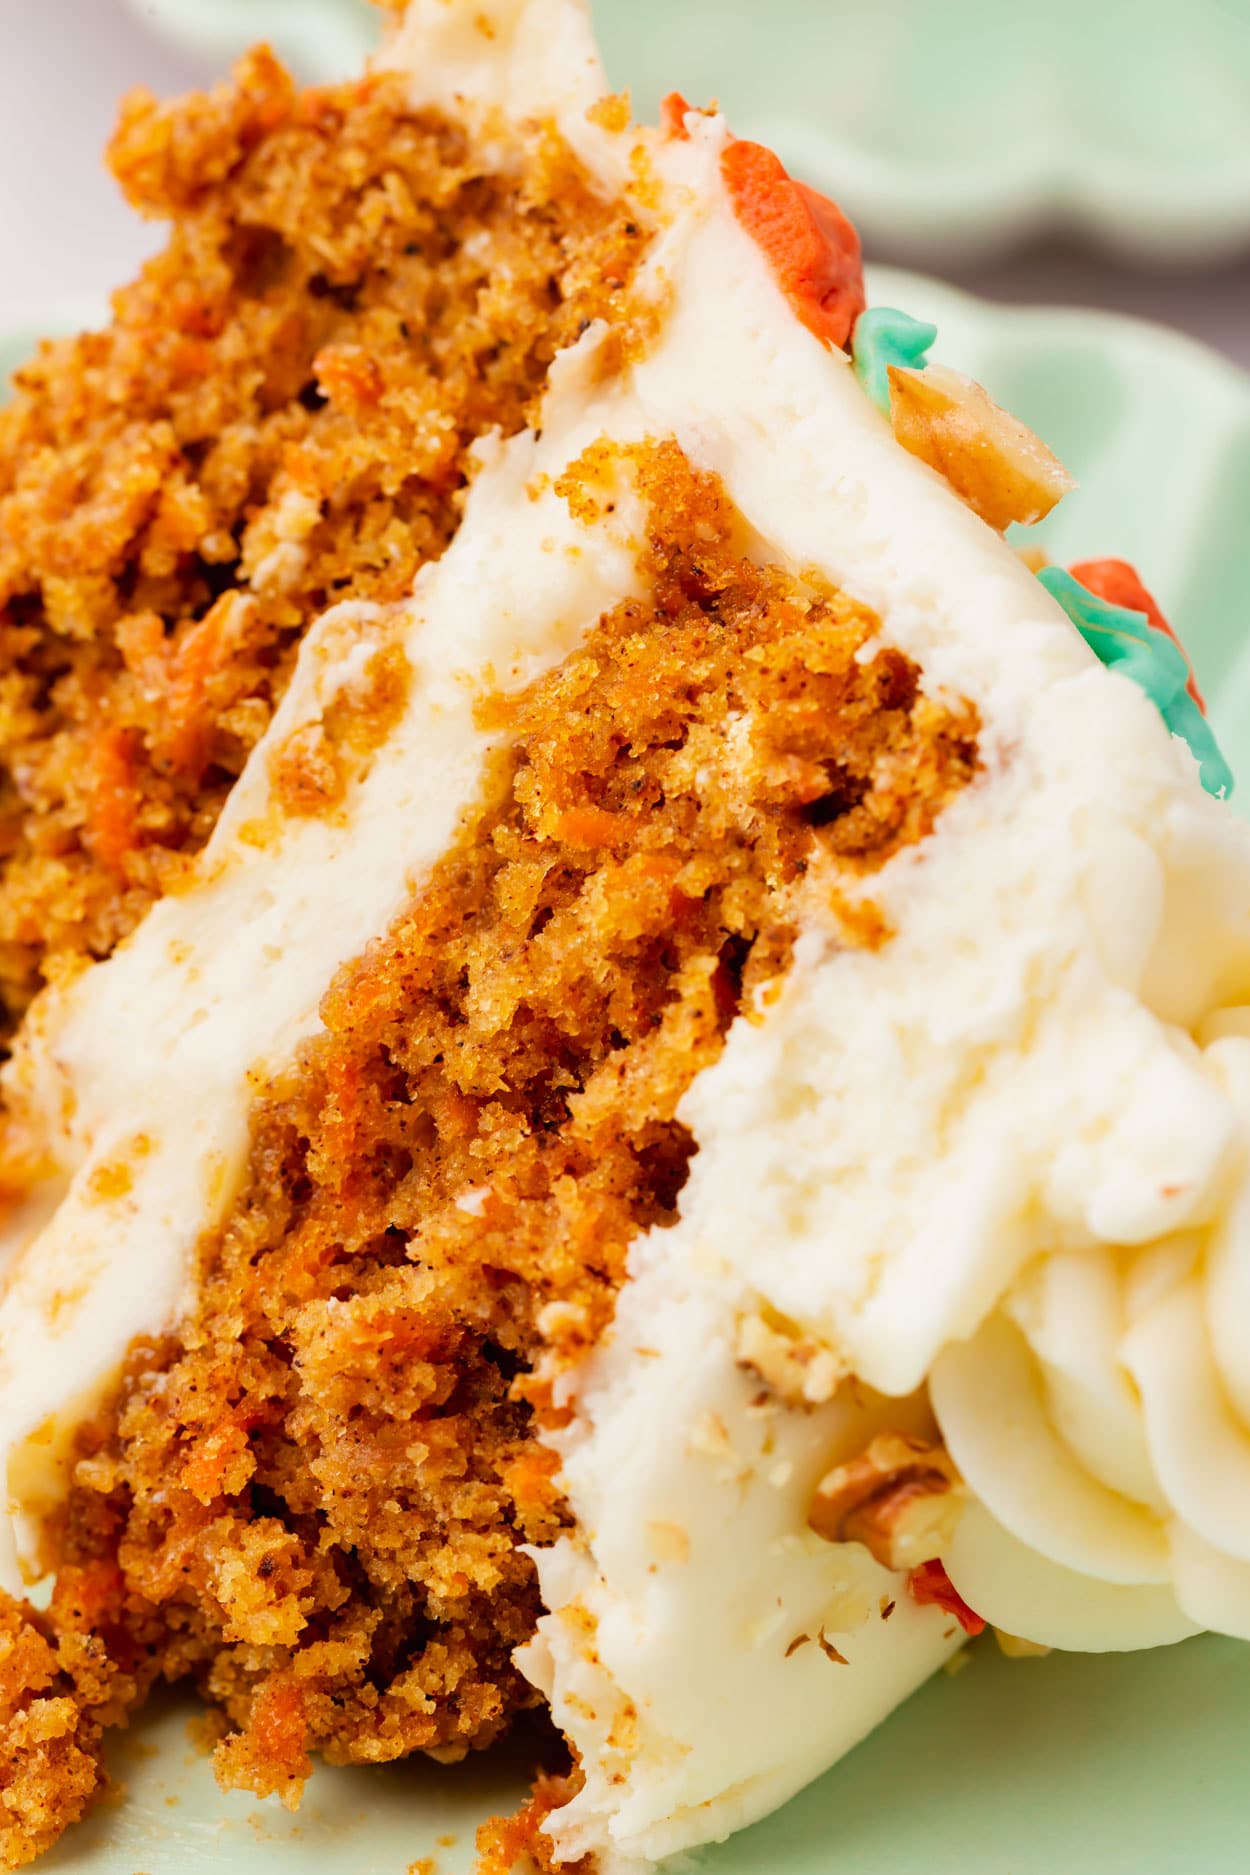 A slice of carrot cake and cream cheese frosting on its side on a plate.